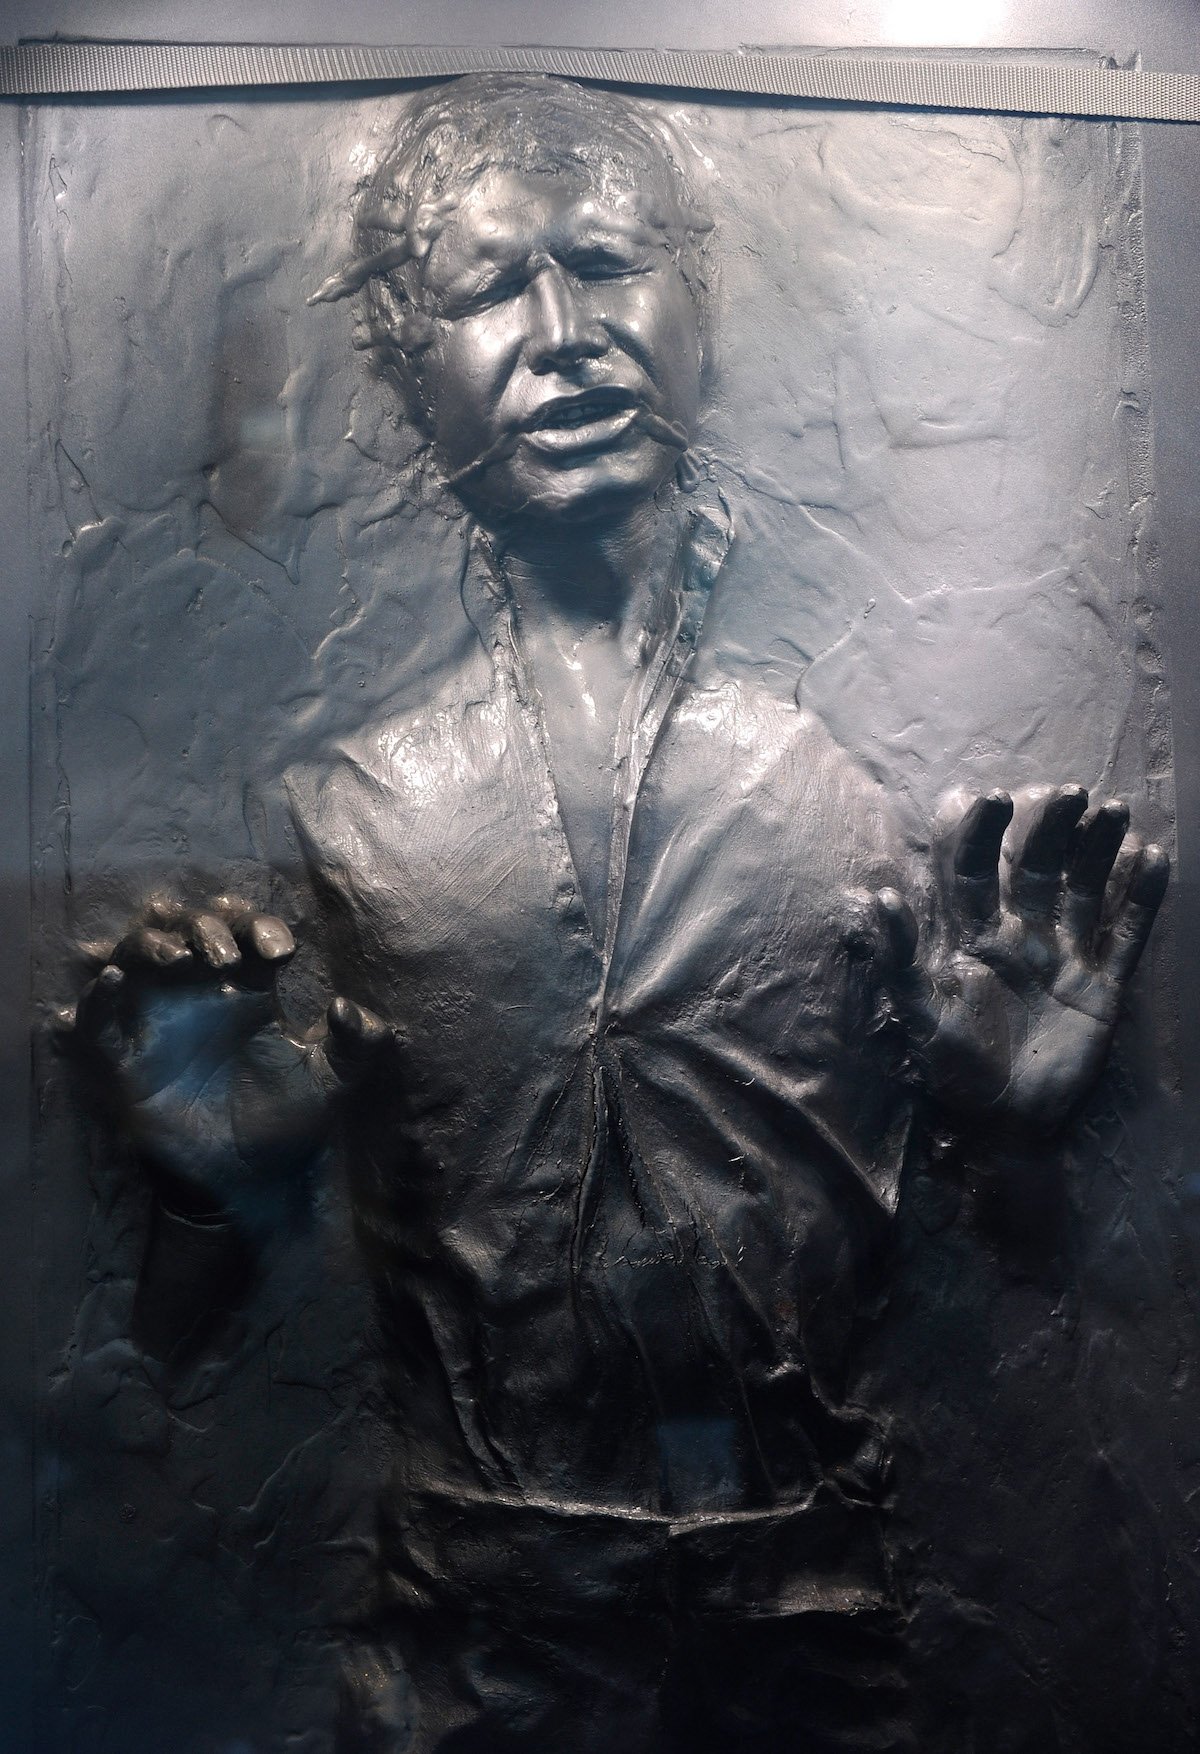 The Star Wars prop of actor Harrison Ford's Han Solo character frozen in carbonite is displayed at the museum exhibit of "Star Wars: In Concert" in 2010